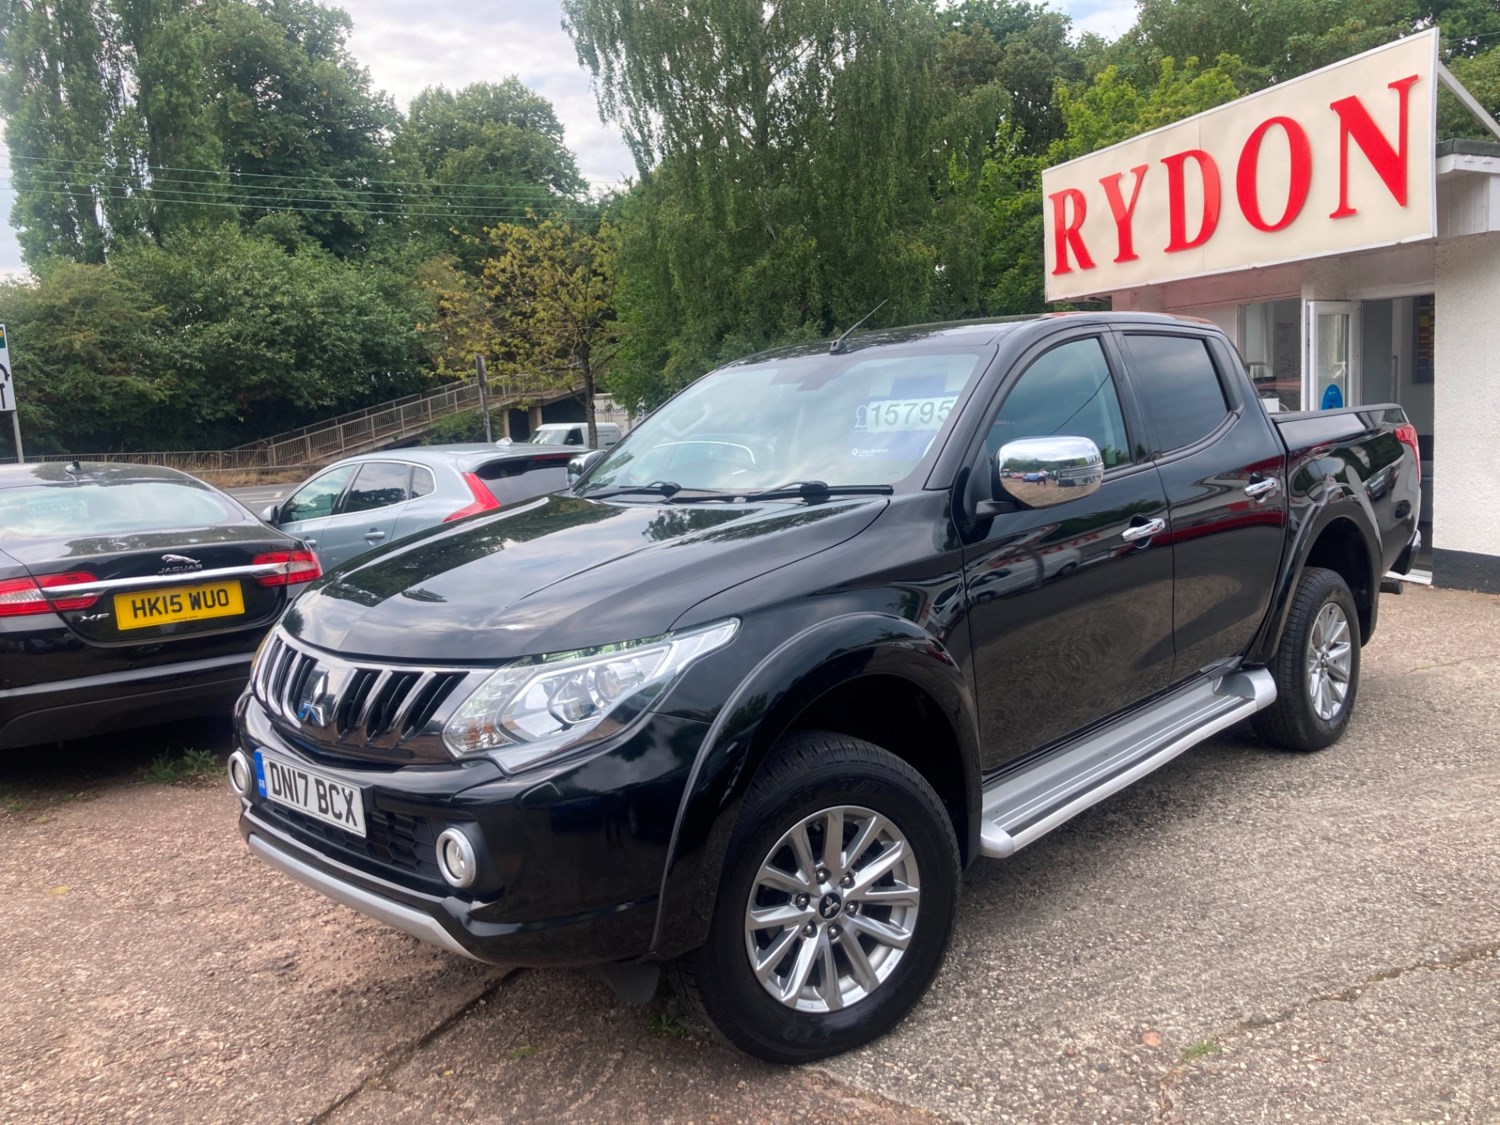 Used Mitsubishi L200 Double Cab DI-D 178 Warrior 4WD PICK UP for sale in  Exeter, Devon - Rydon Car Sales Exeter